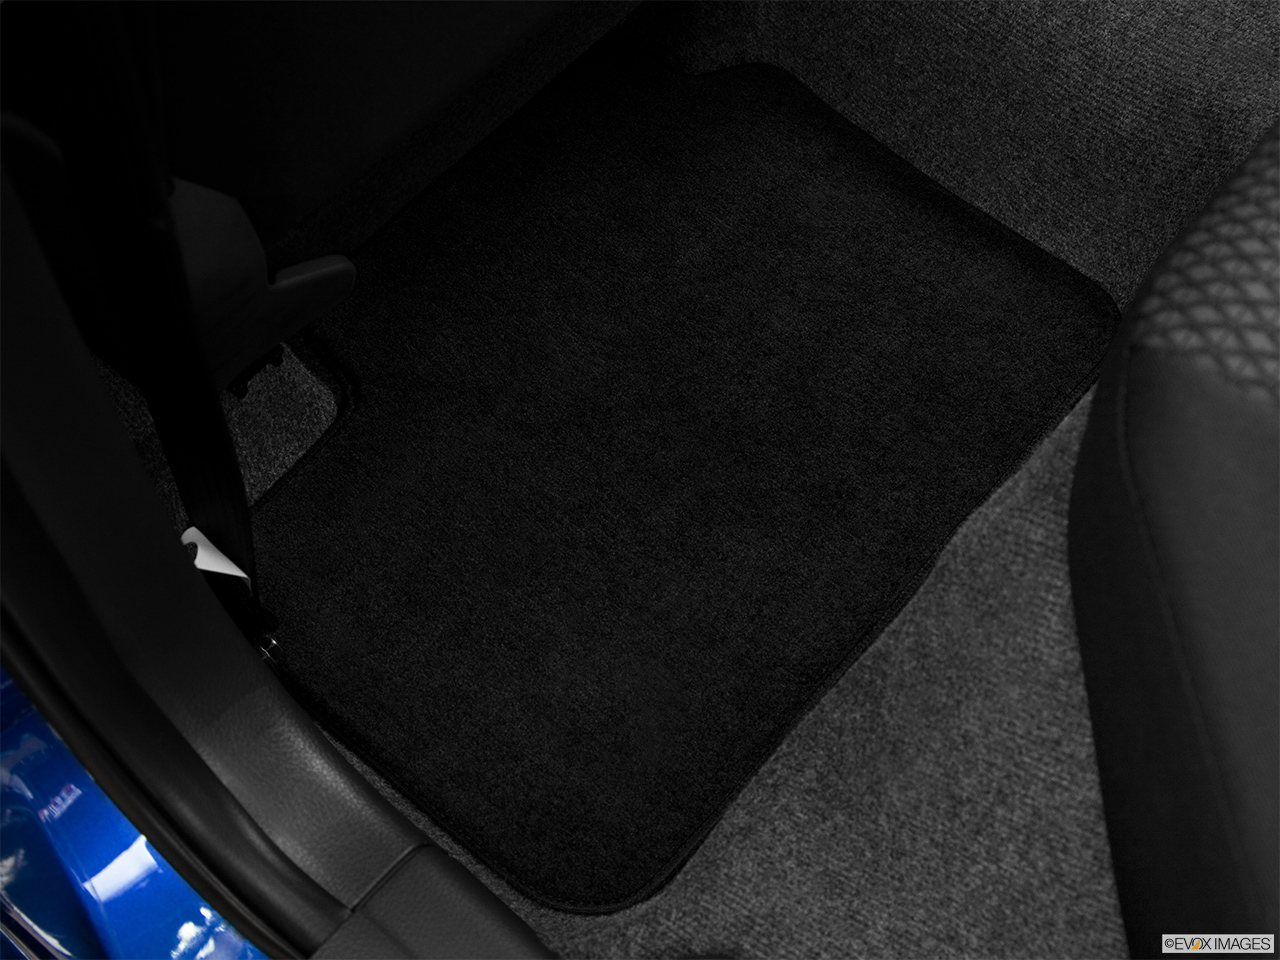 2013 Suzuki SX4 AWD Crossover Premium AT AWD Rear driver's side floor mat. Mid-seat level from outside looking in. 